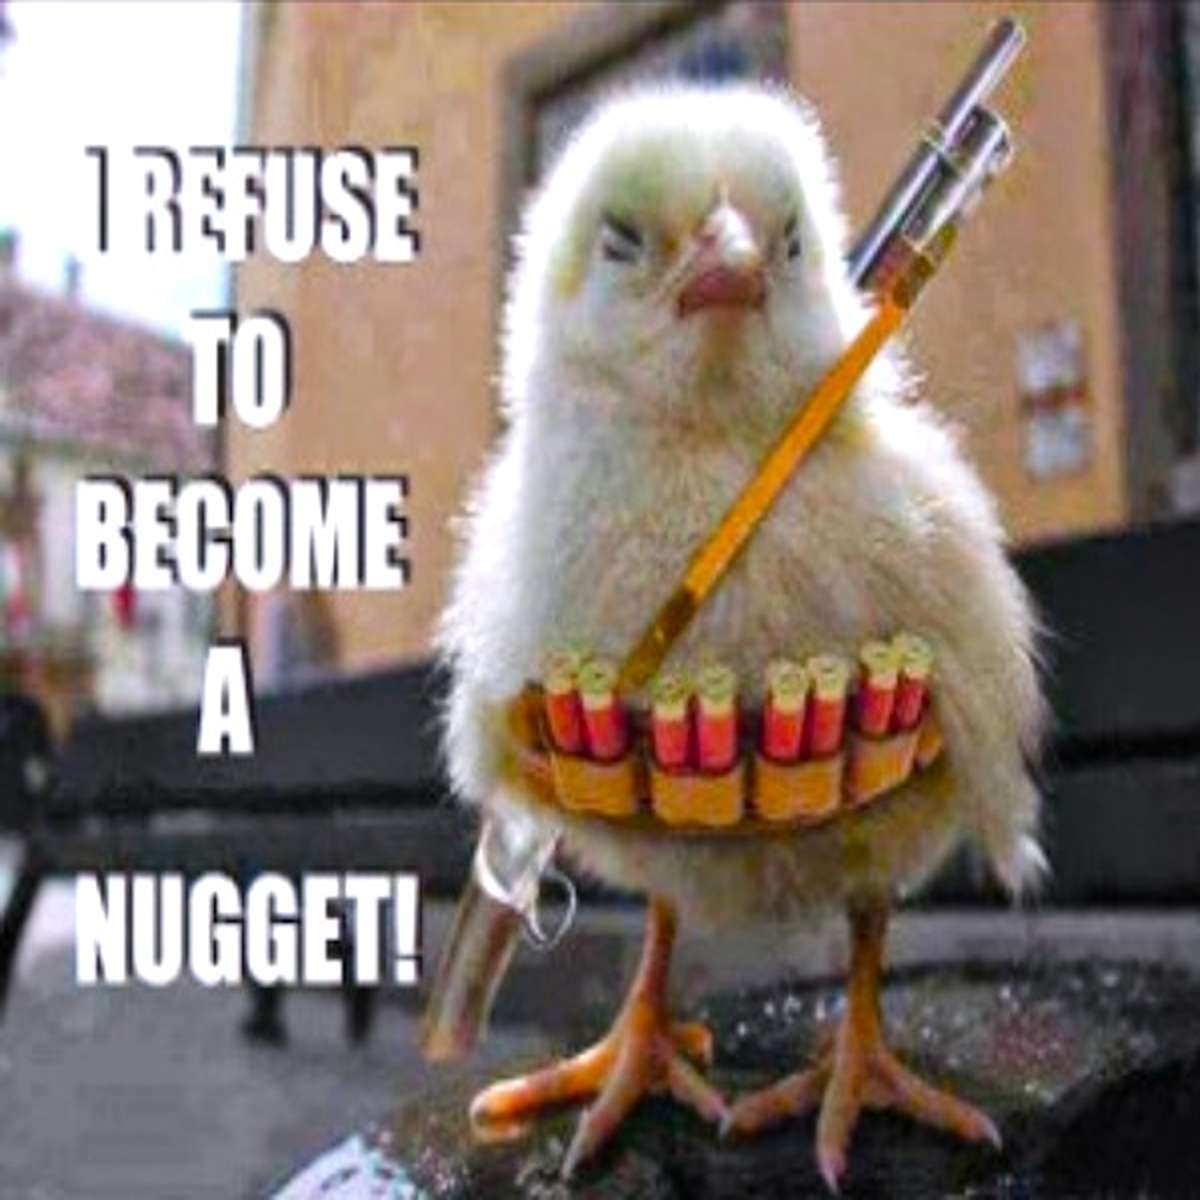 fresh memes - fauna - 1 Refuse To Become A Nugget! www